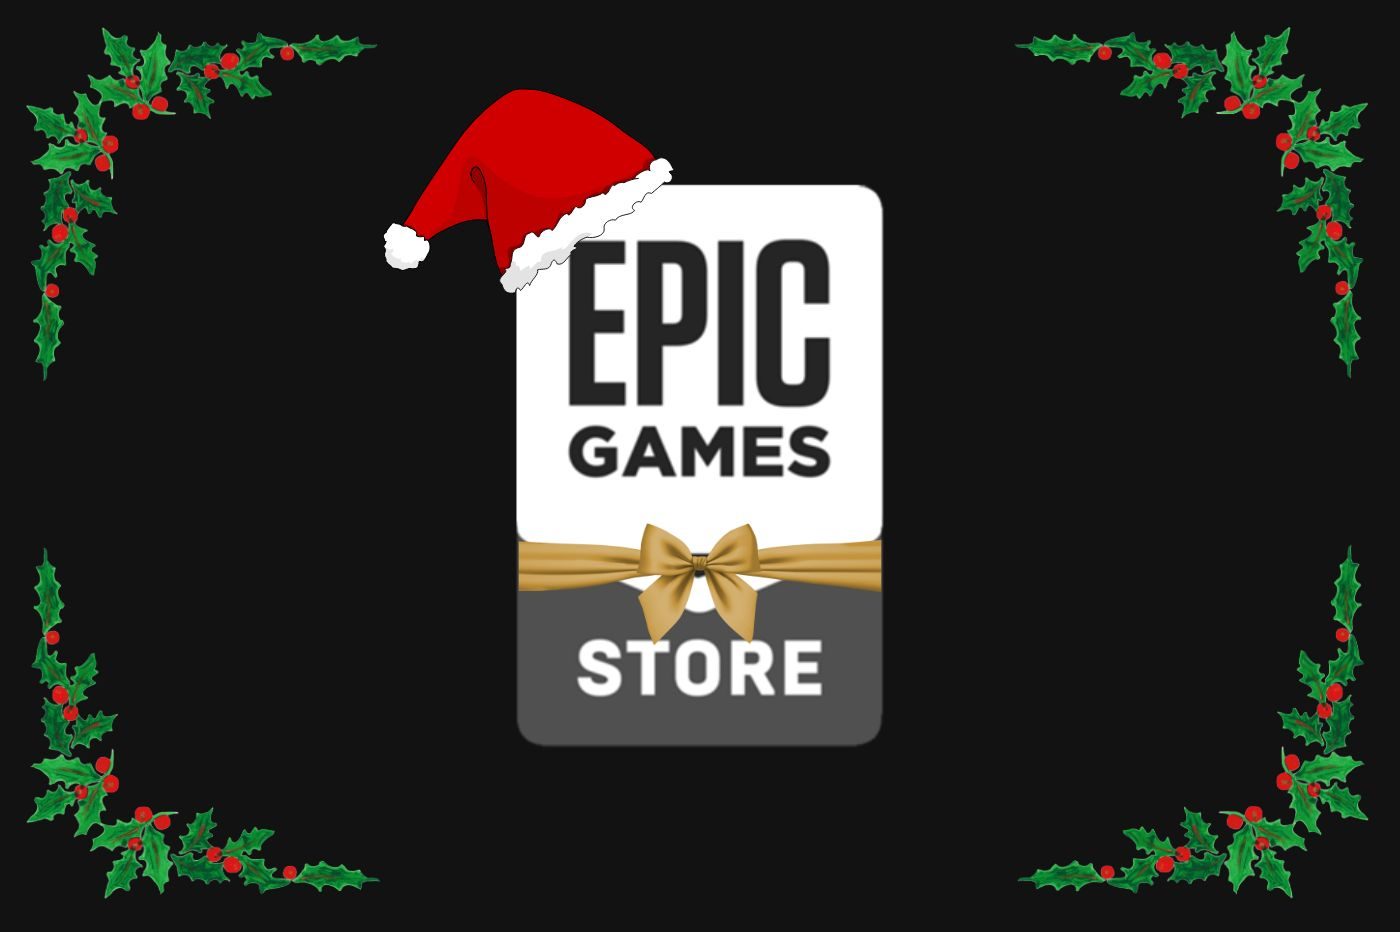 epic games store calendrier avent